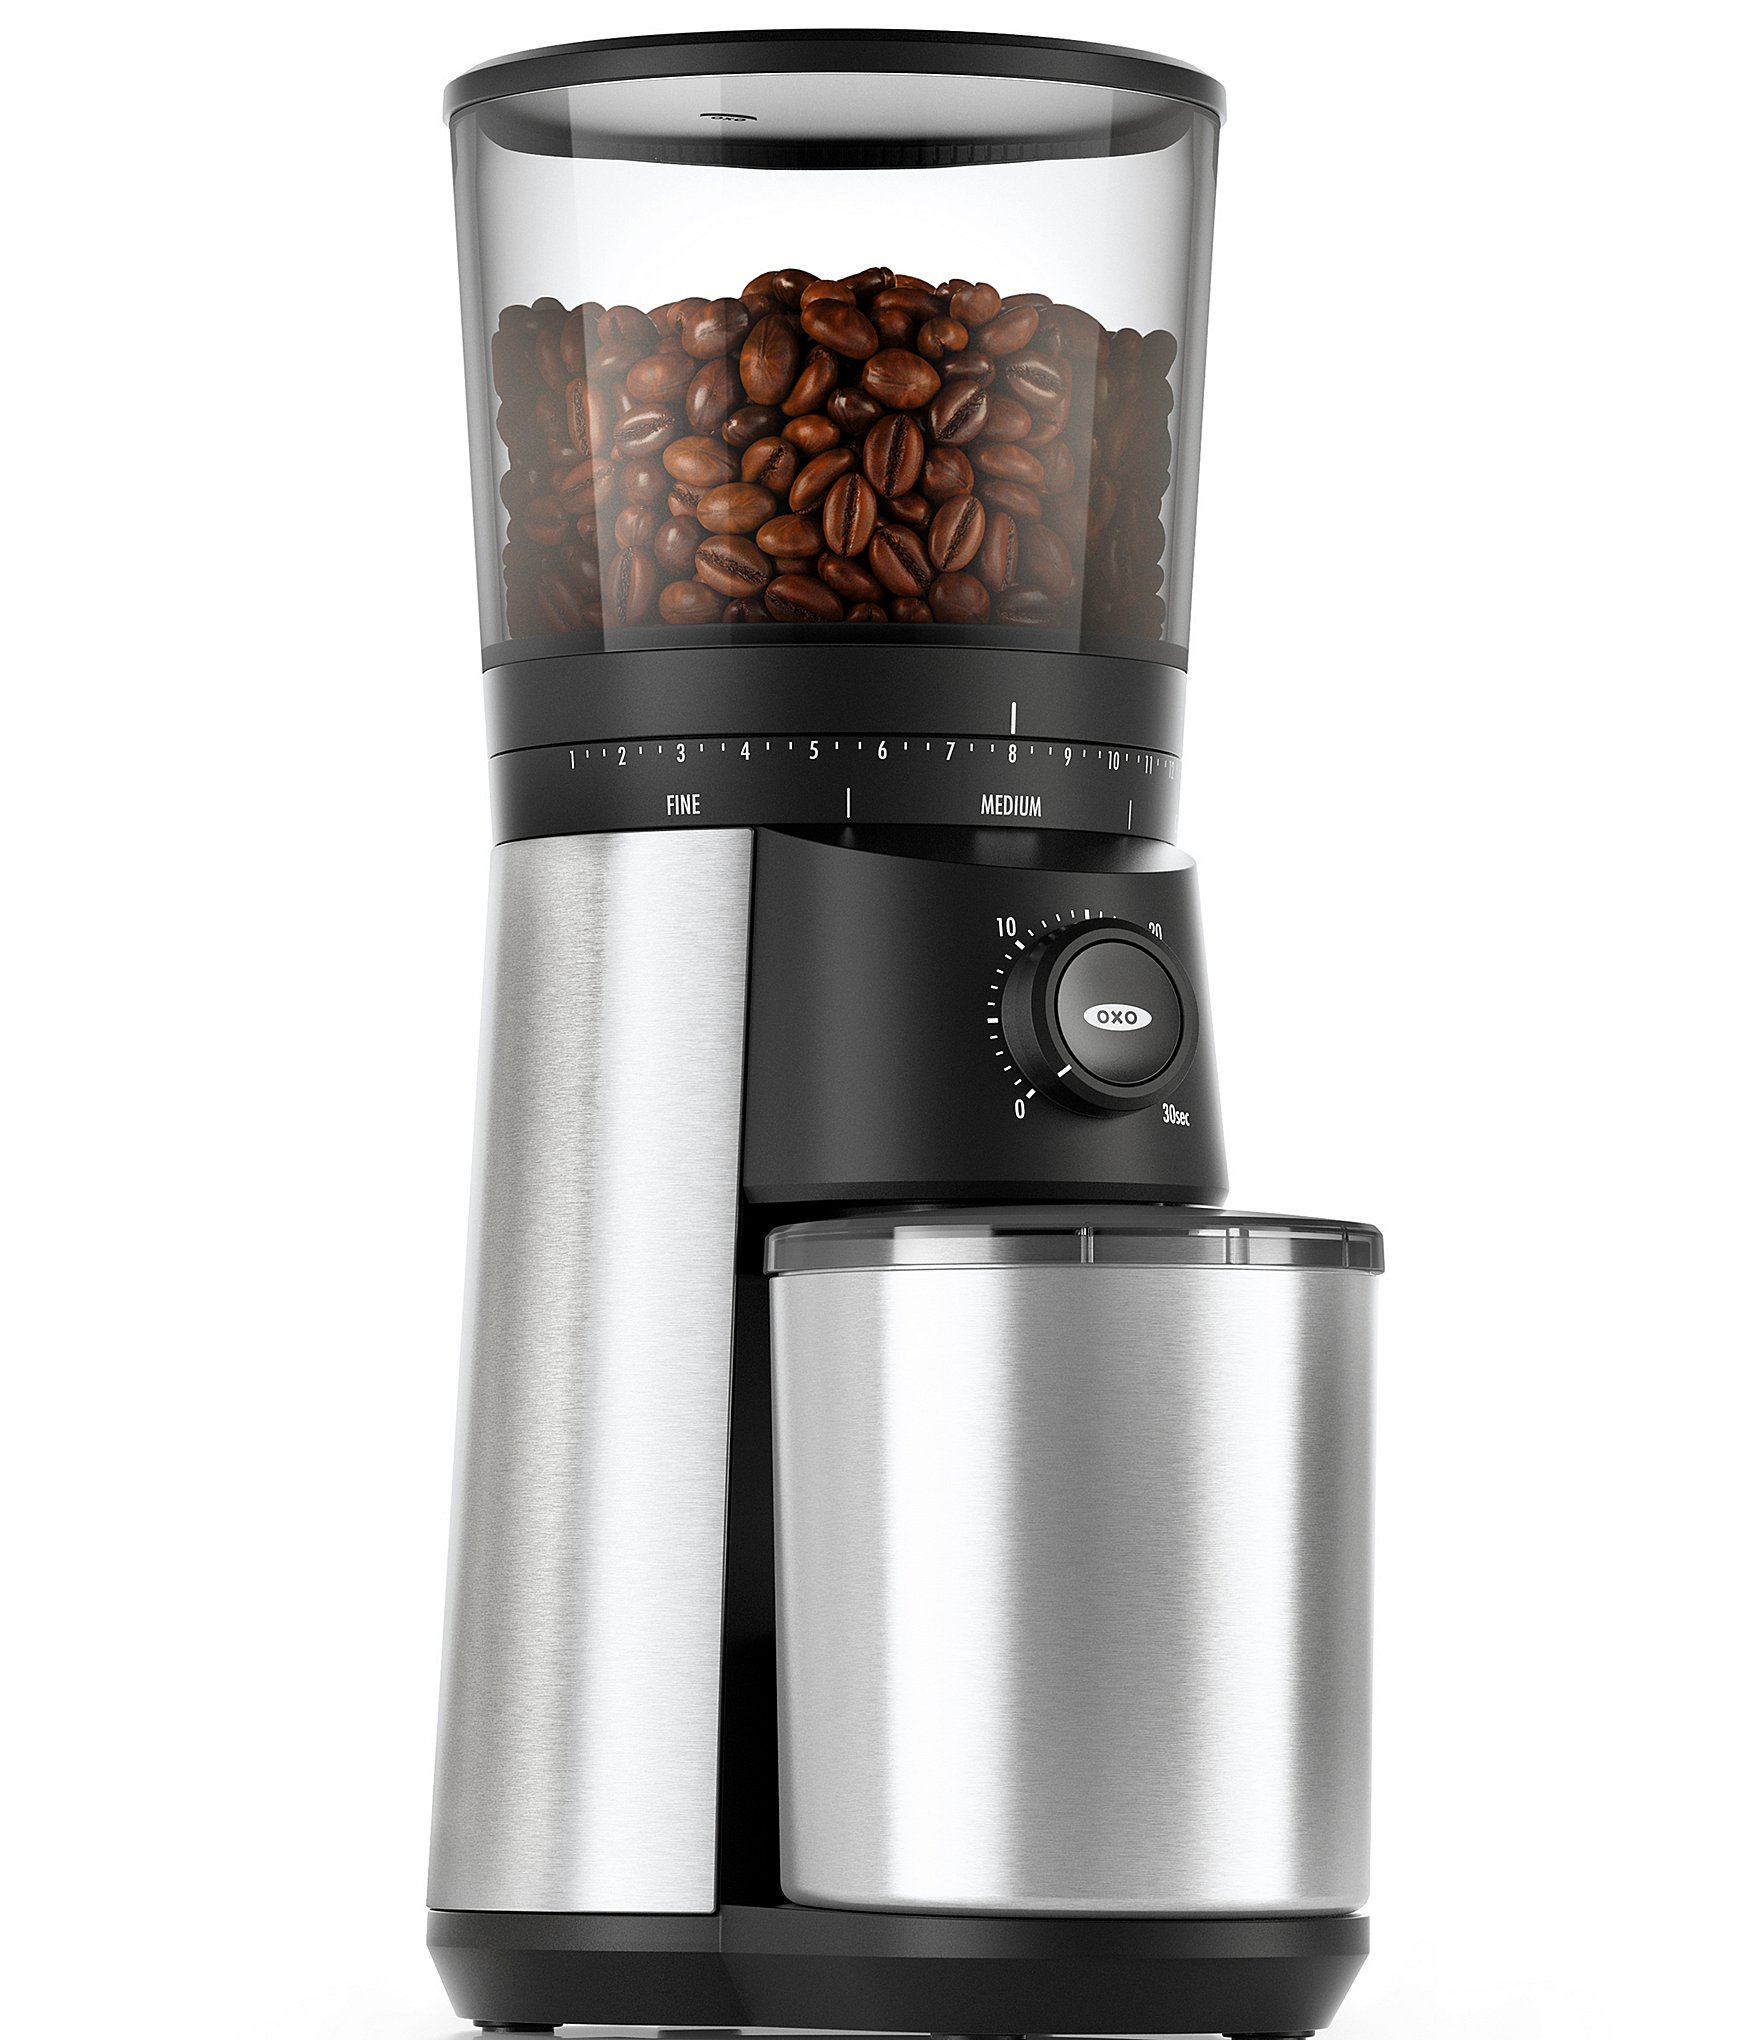 Bellows Upgrade for OXO Conical Burr Grinder For Lower Retention – INTROVERT